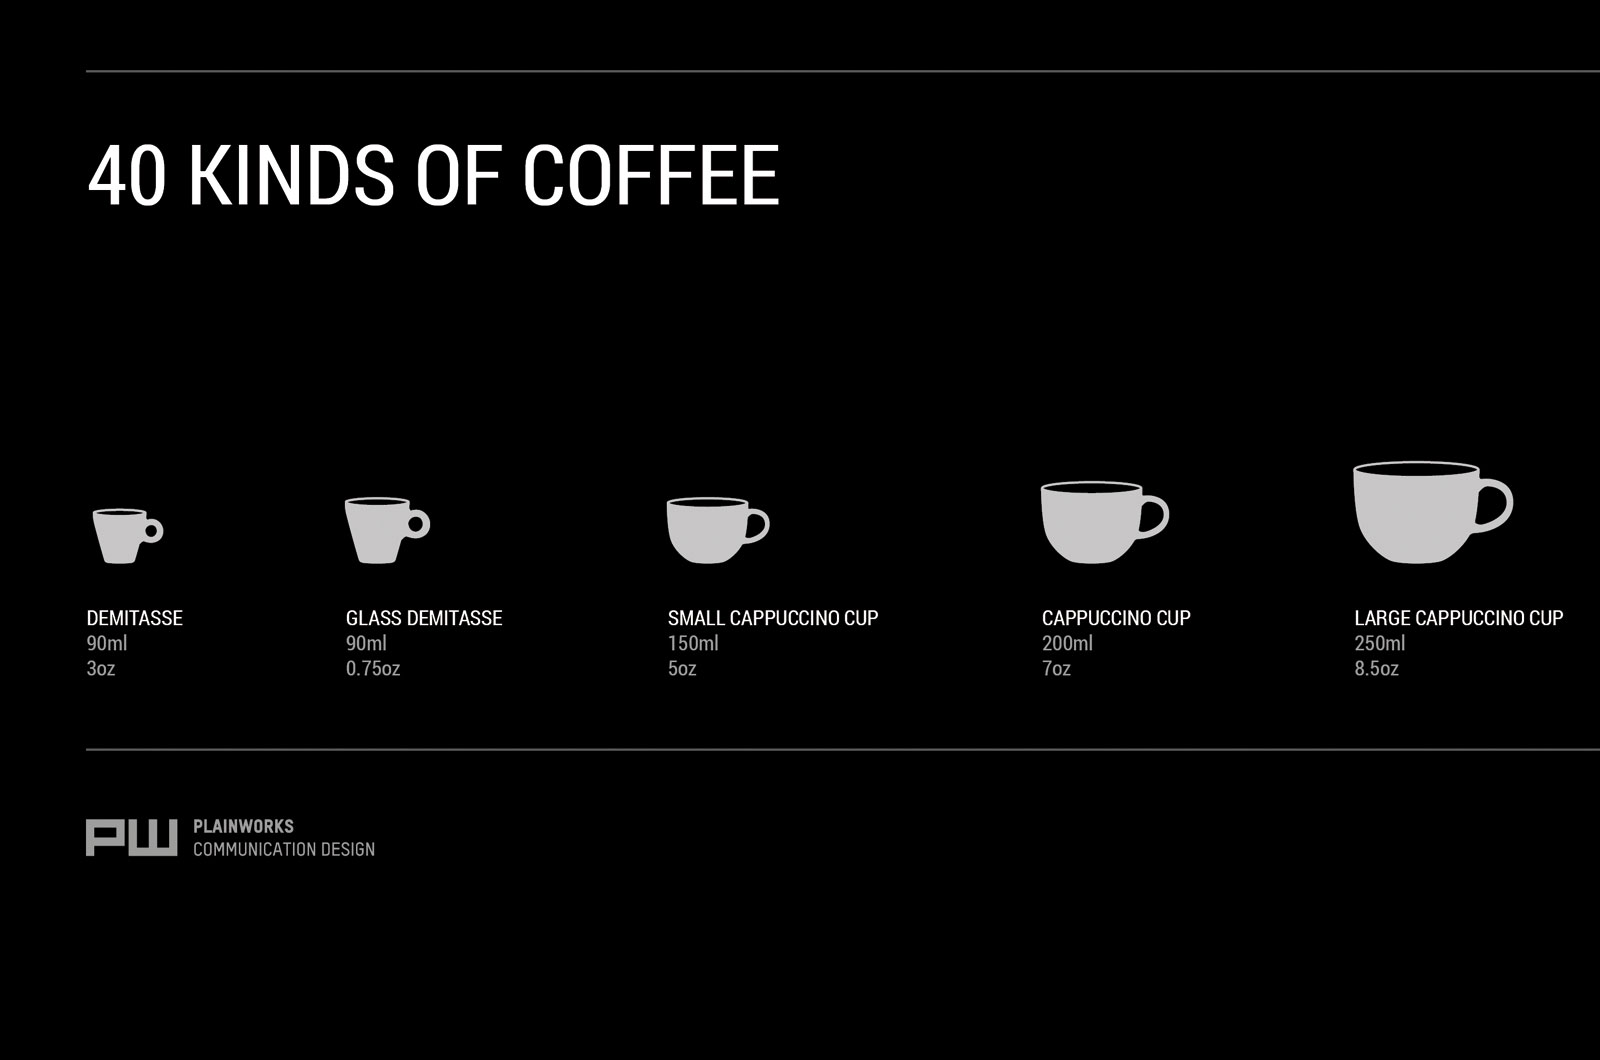 Alexander Glante - Works - Forty Kinds of Coffee - 09